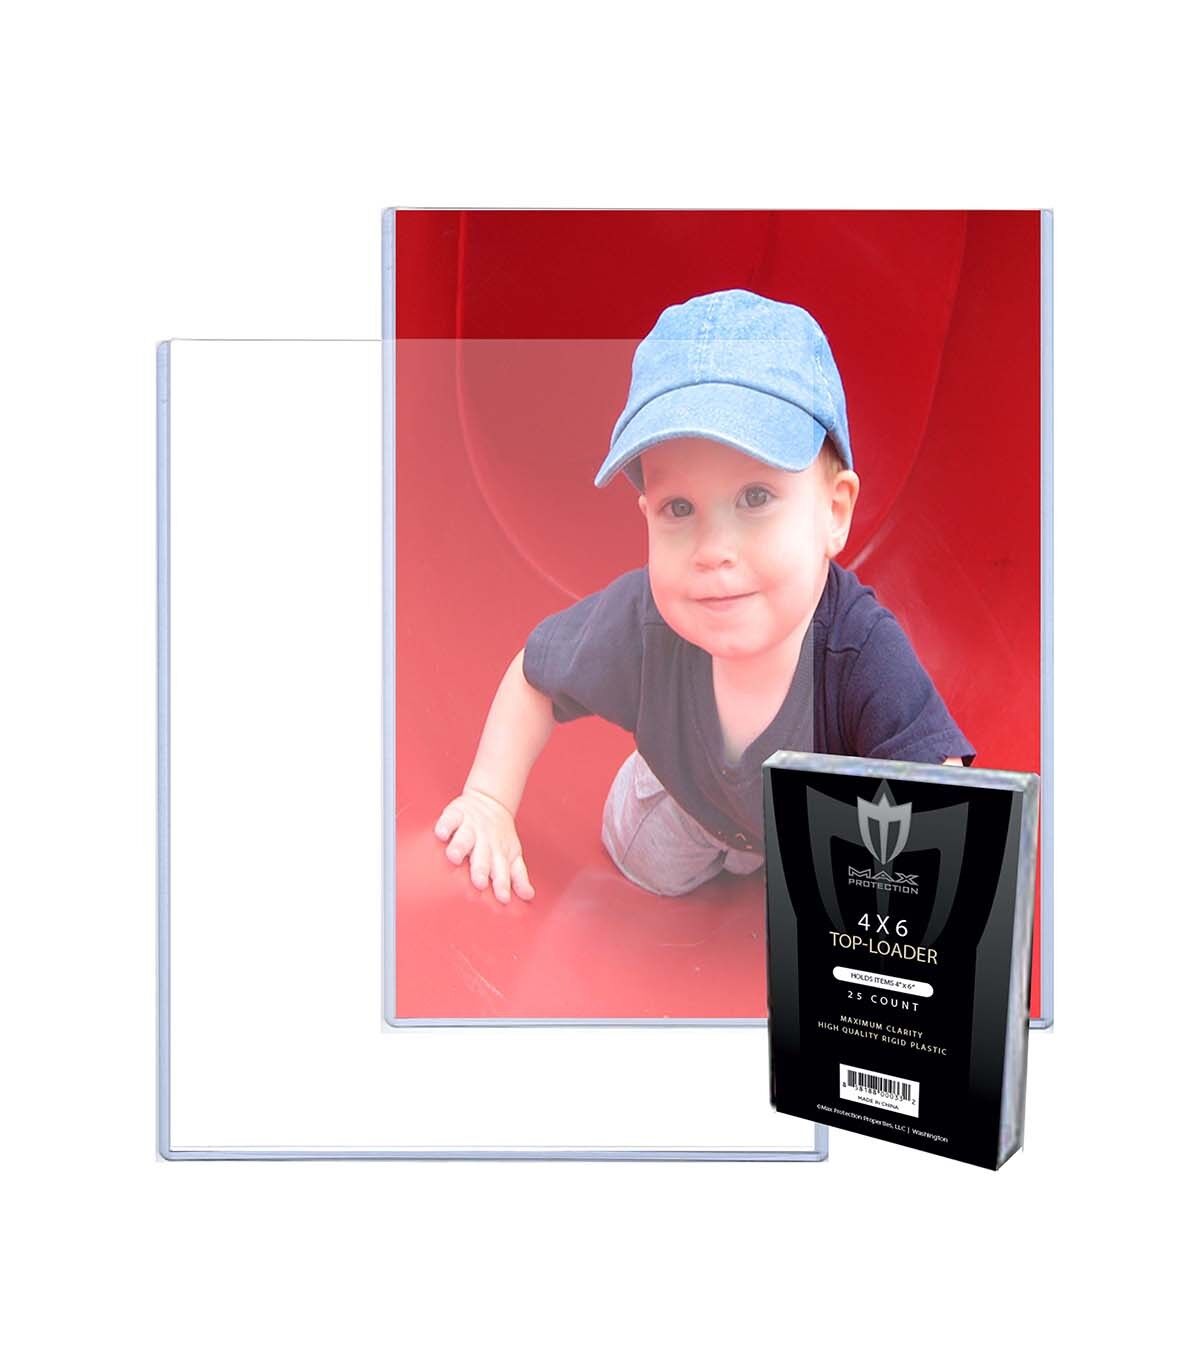 100 Max Pro 4x6 Toploaders Postcard Photo Holders Storage Ultra Protection